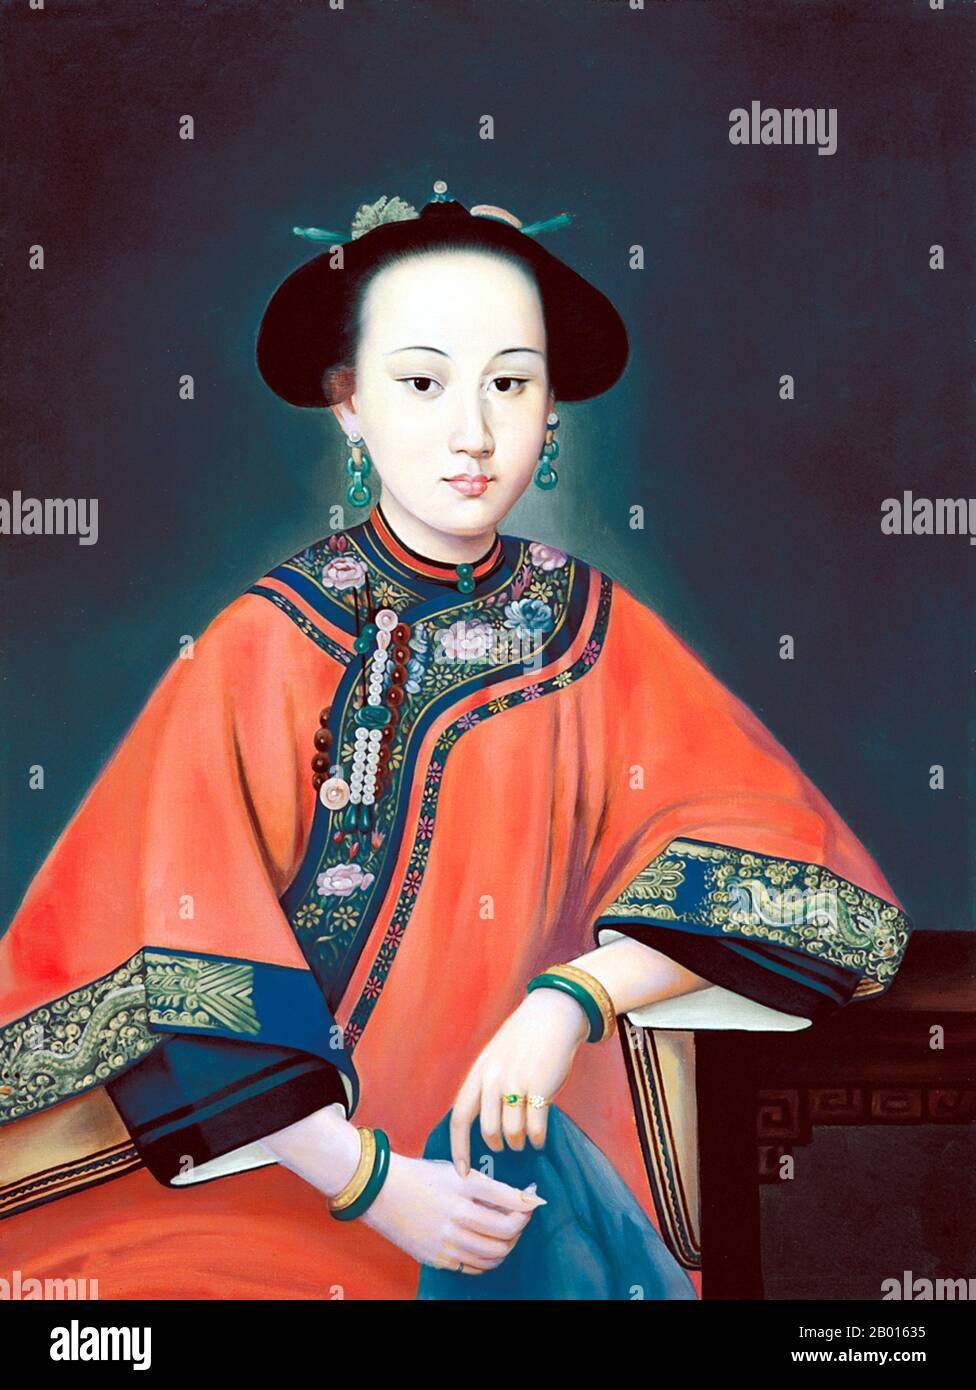 China: 'The Fragrant Concubine' Oil on canvas painting by Giuseppe Castiglione/Lang Shining (1688-1766), c. 1750.  The Fragrant Concubine ('Xiang Fei') was a figure in Chinese legend, a suspected consort of the Qianlong Emperor. Although the stories about her are believed to be mythical, they may have been based on an actual concubine from western China who entered the imperial harem in 1760 and was titled 'Imperial Consort Rong'. Some suggest, however, that Imperial Consort Rong and Xiang Fei (whose original name may have been Nur Ela Nurhan or Iparhan) were different women. Stock Photo